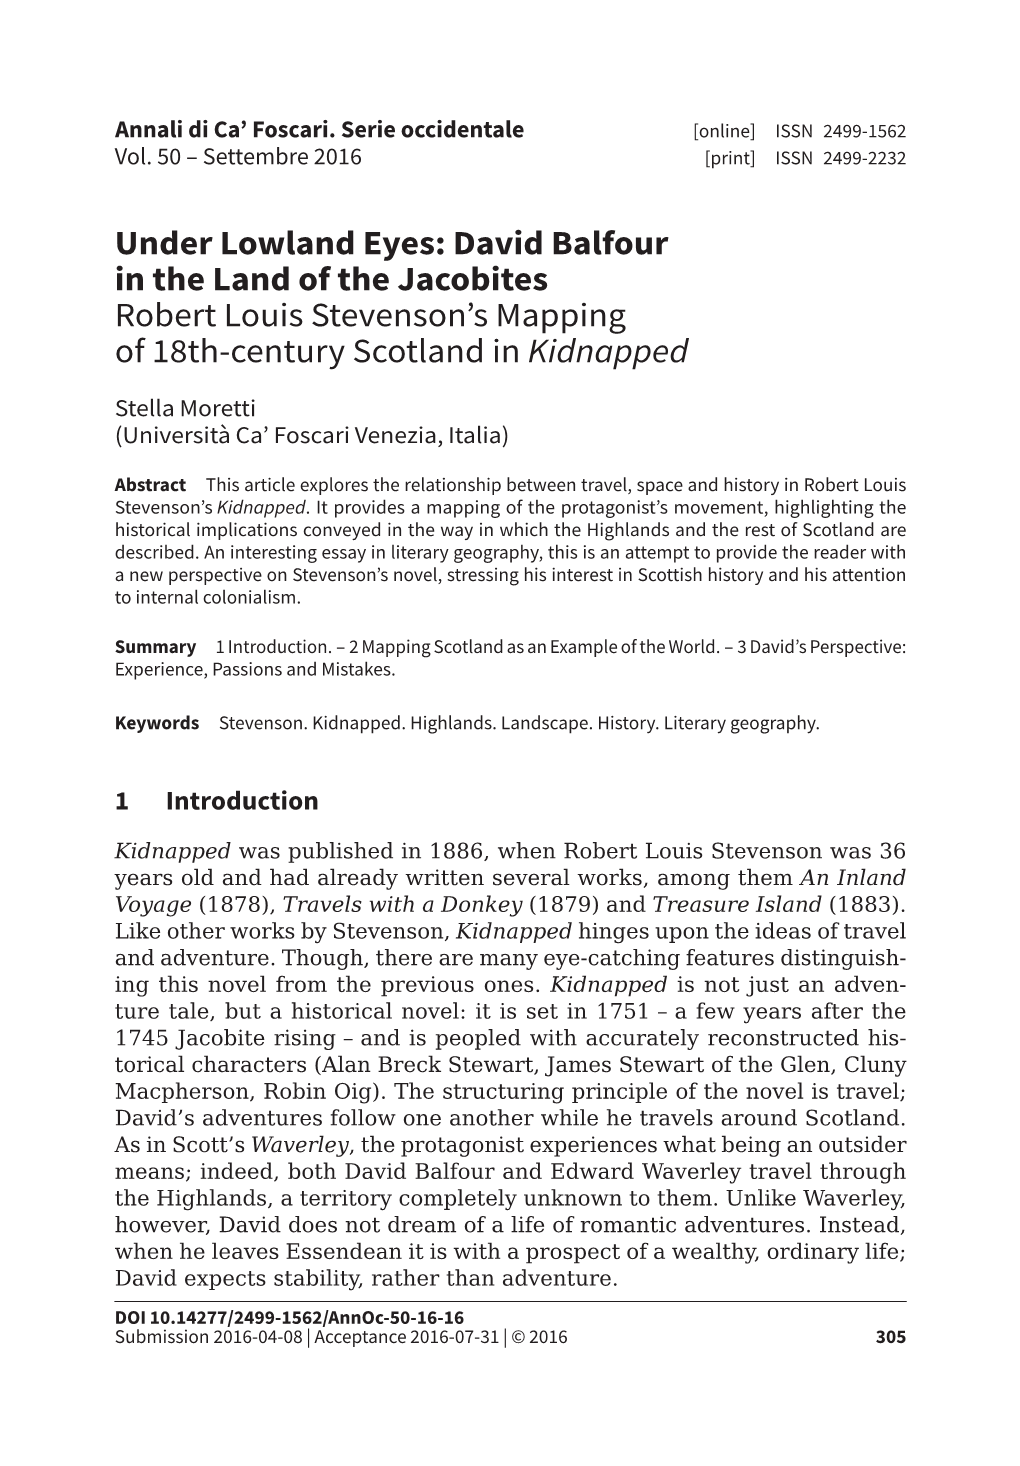 Under Lowland Eyes: David Balfour in the Land of the Jacobites Robert Louis Stevenson’S Mapping of 18Th-Century Scotland in Kidnapped